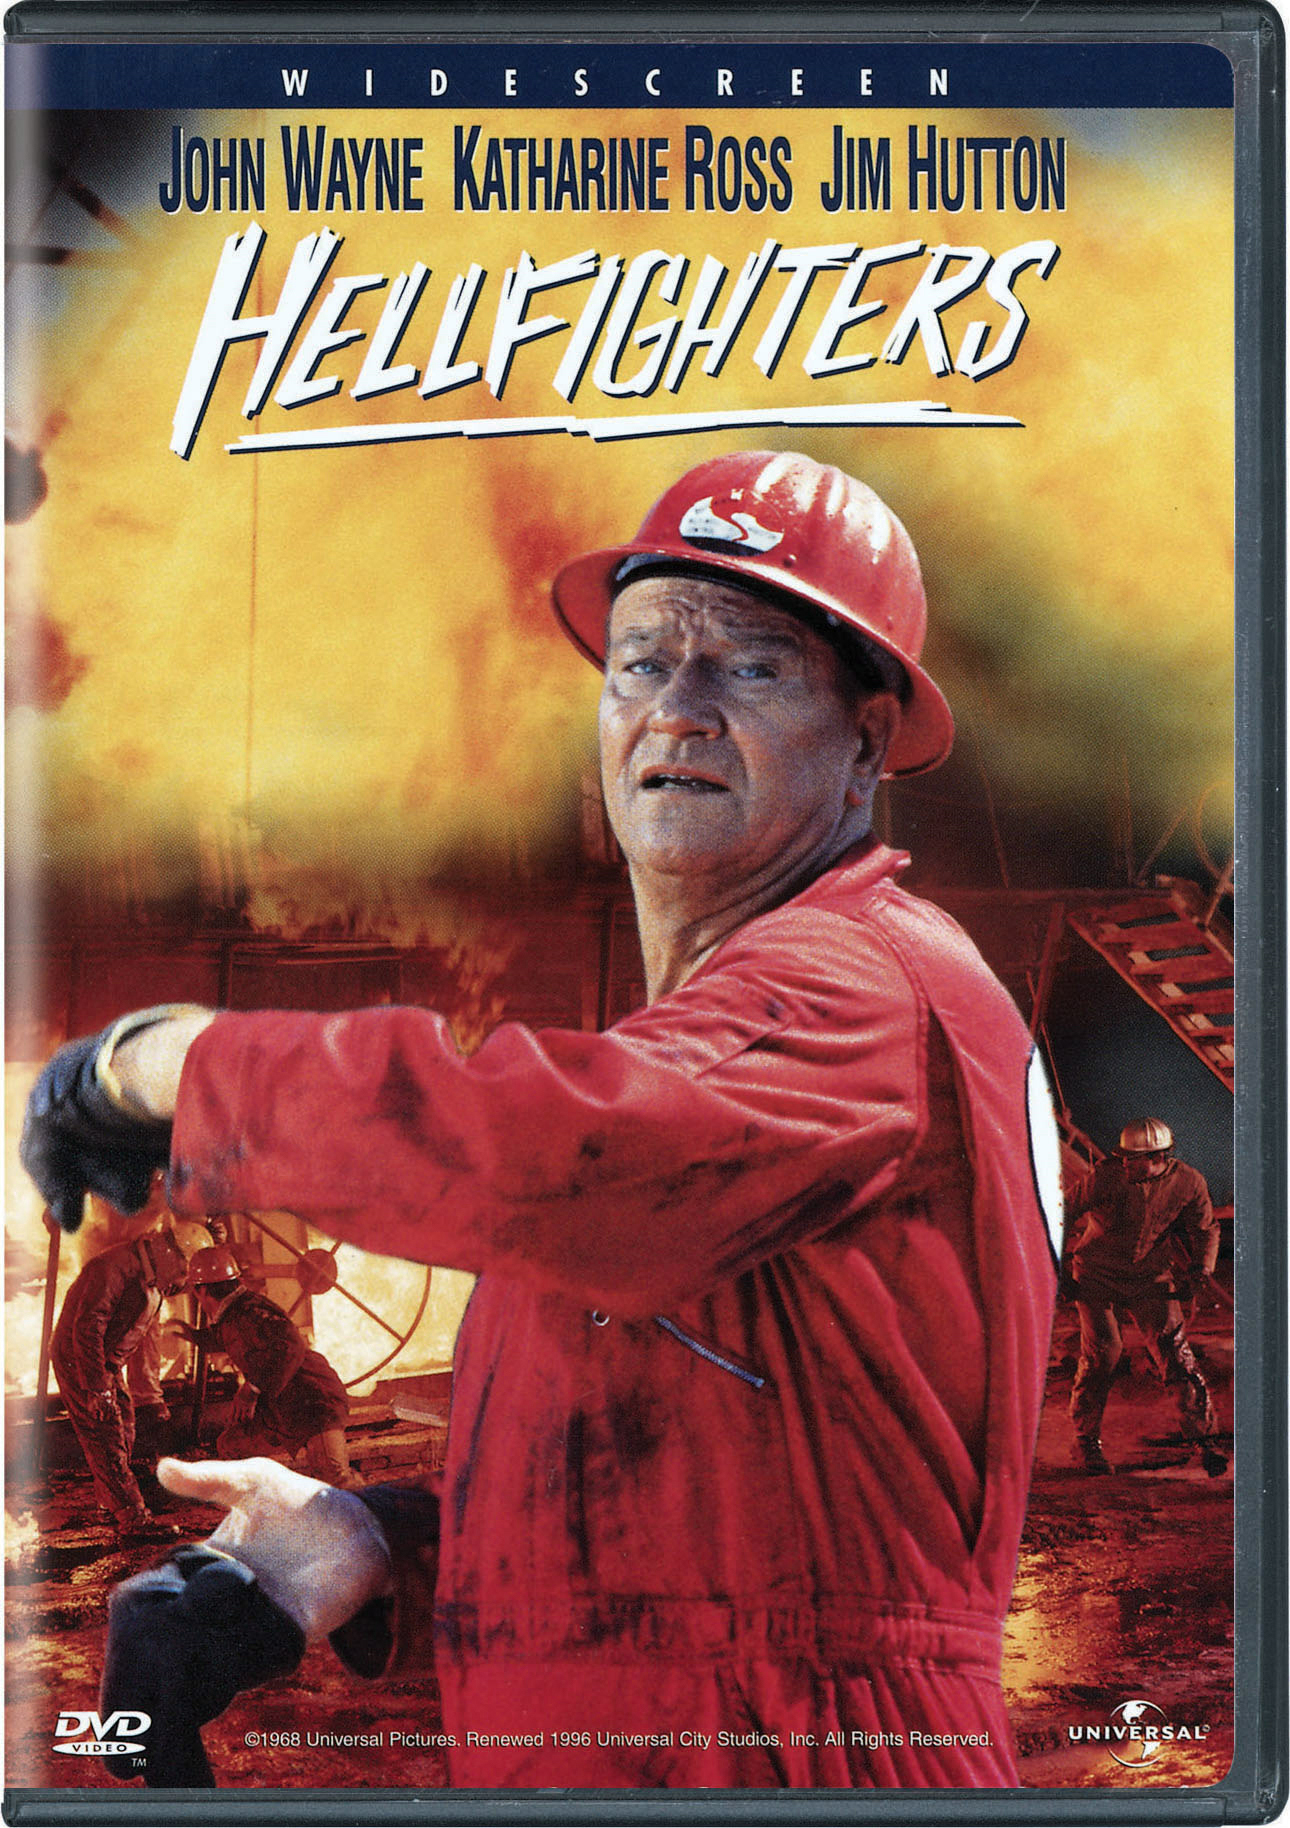 Hellfighters - DVD [ 1968 ]  - Modern Classic Movies On DVD - Movies On GRUV